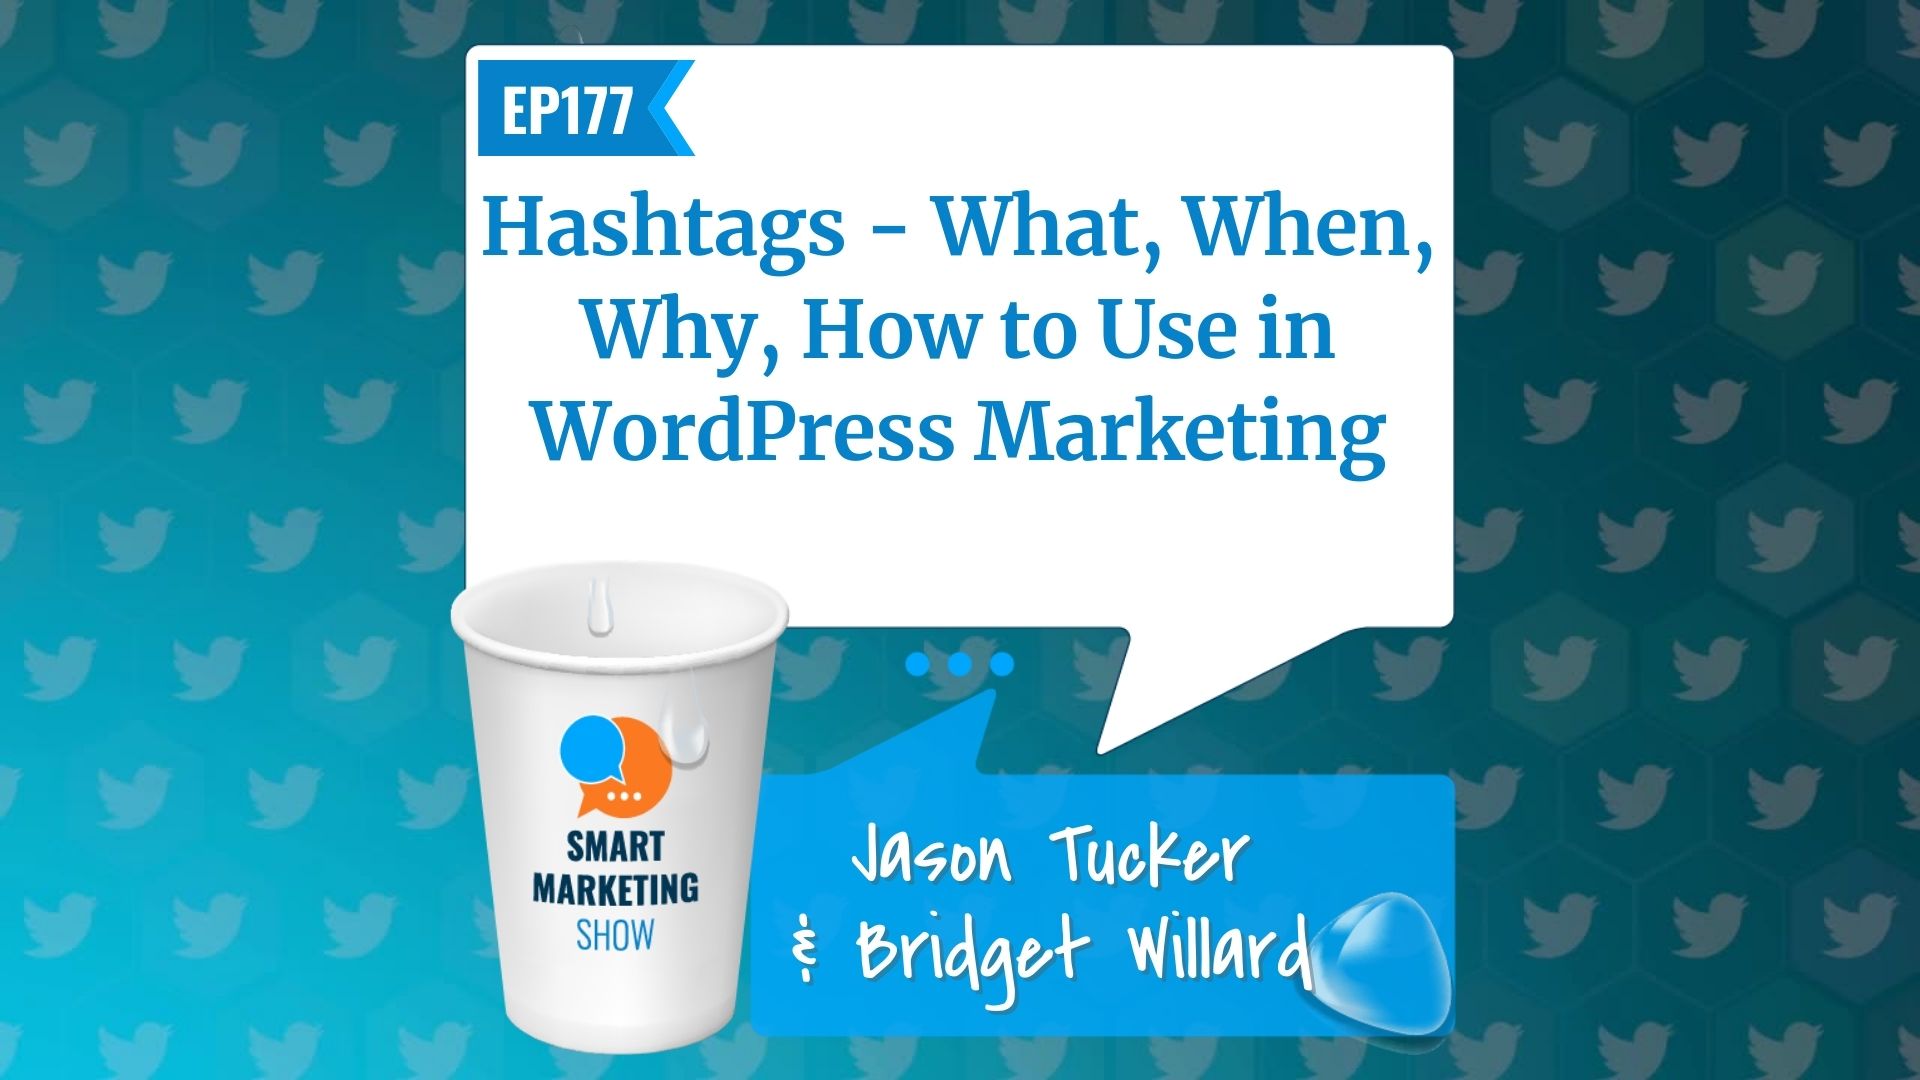 EP177 – Hashtags – What, When, Why, How to Use in WordPress Marketing